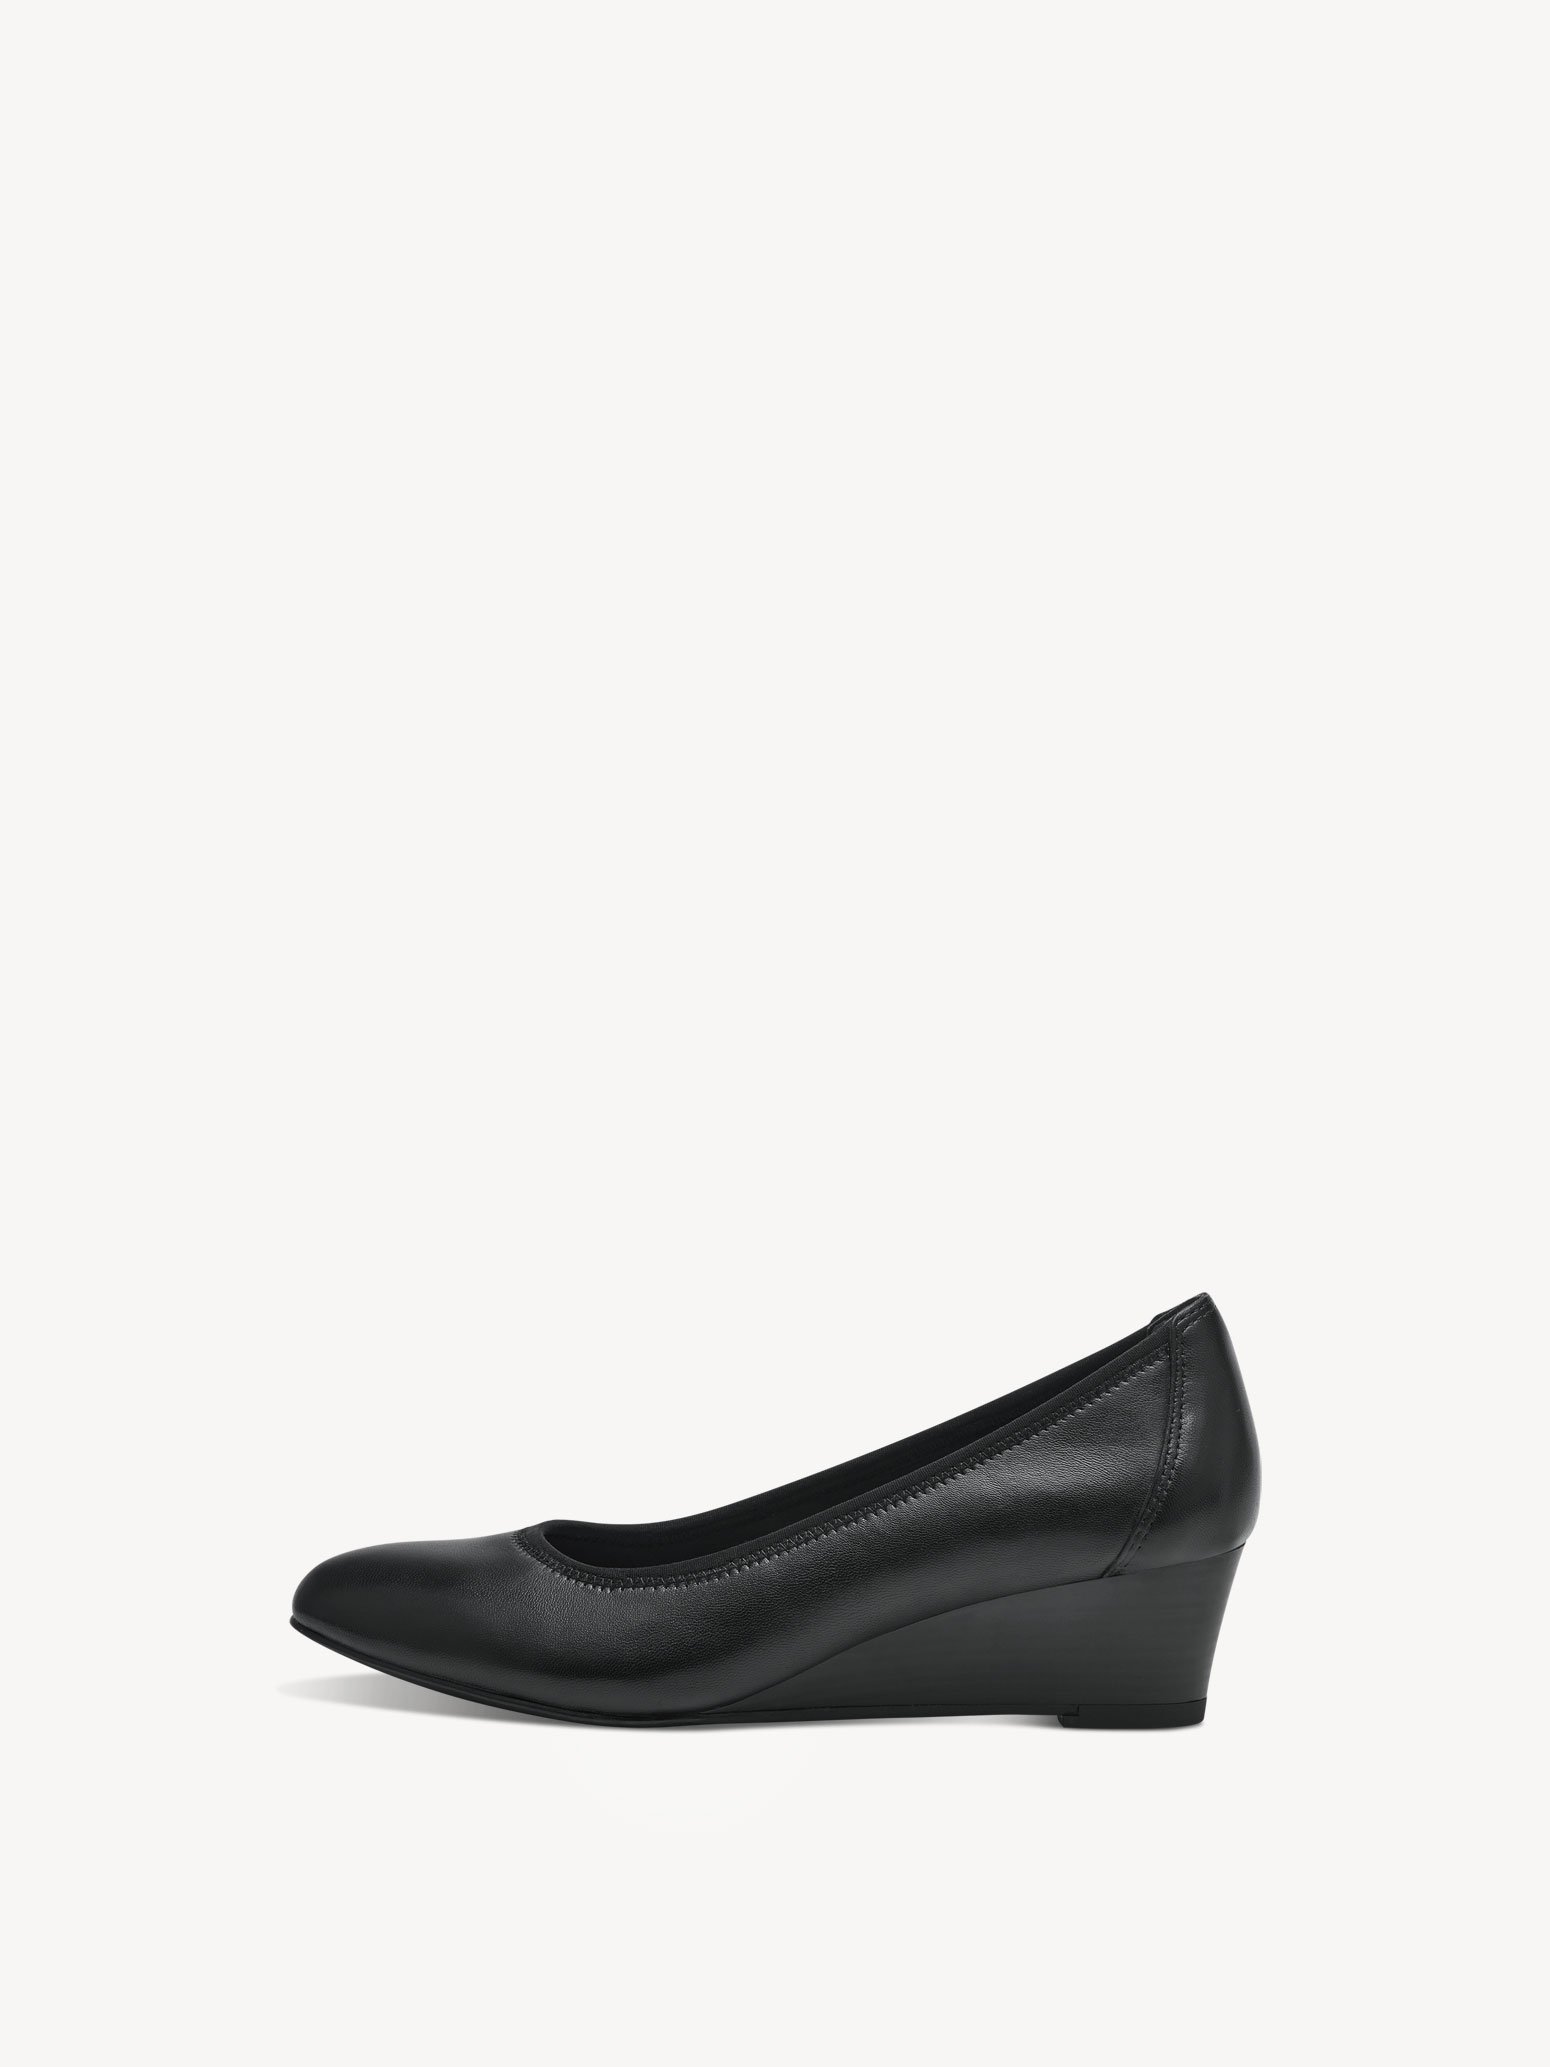 Leather Wedge pumps - black